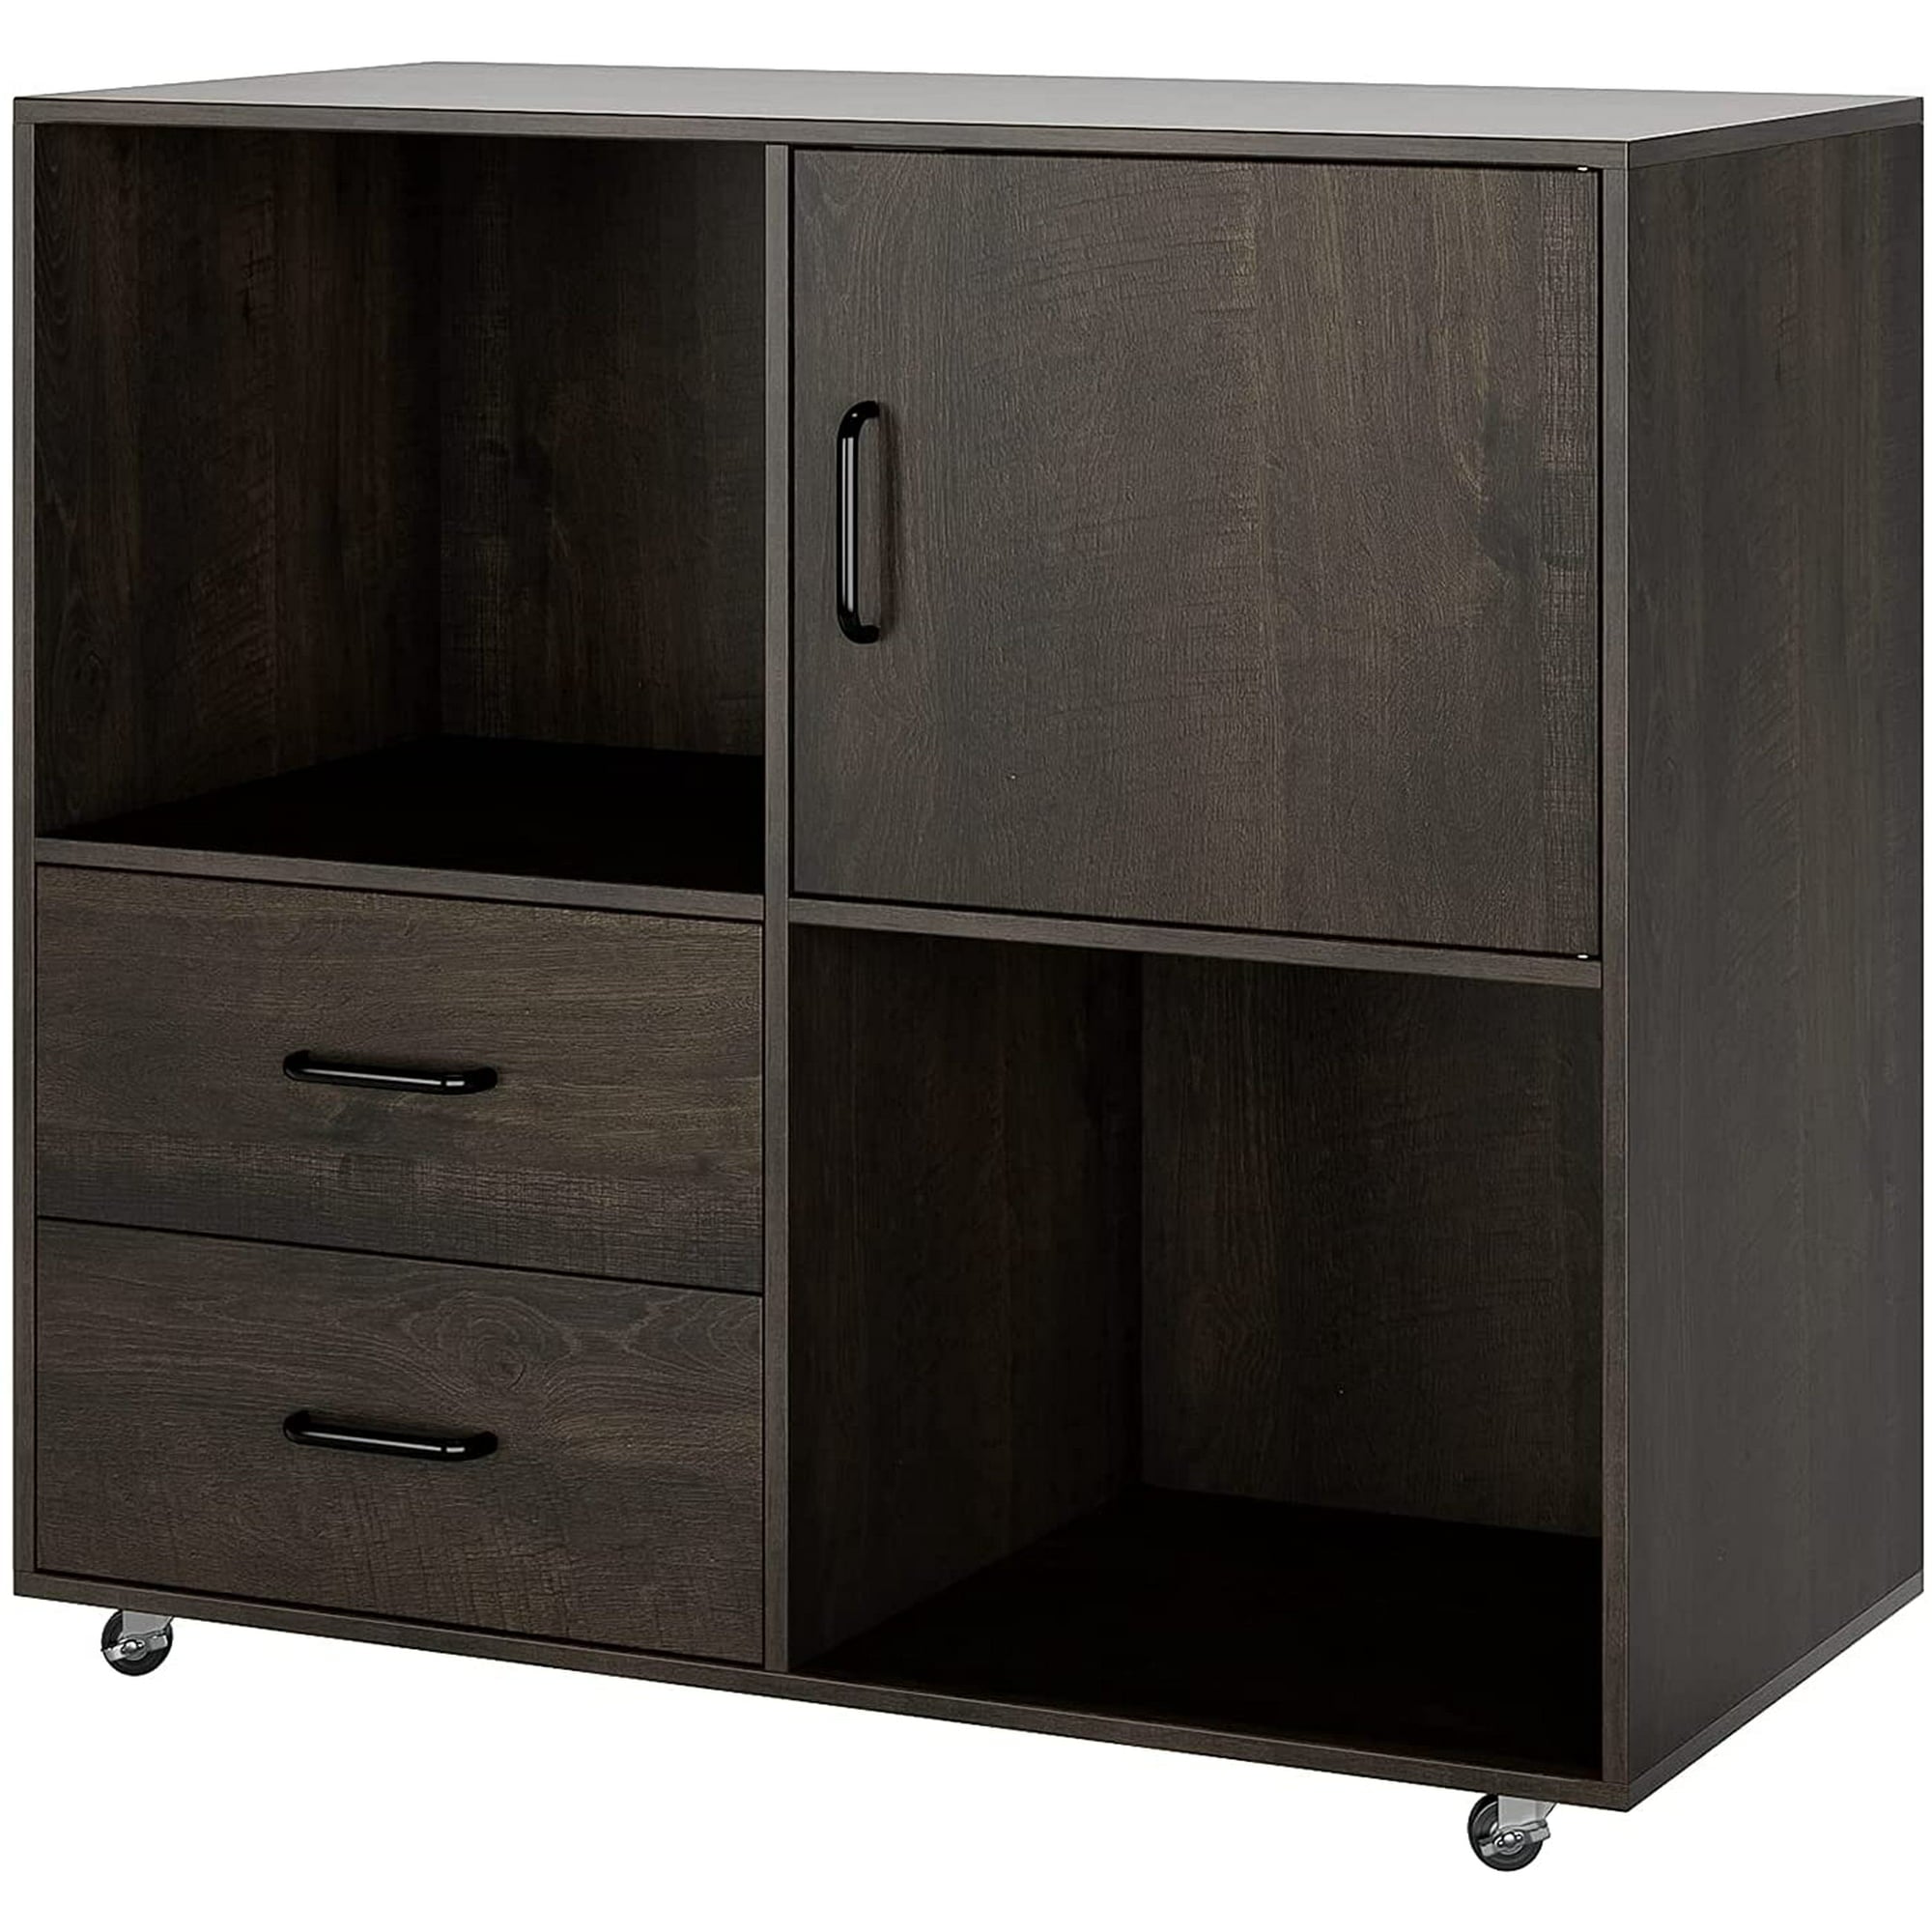 Storage Cabinet - Mobile Lateral Filing Cabinet with Wheels - JL Storage Cabinet 3